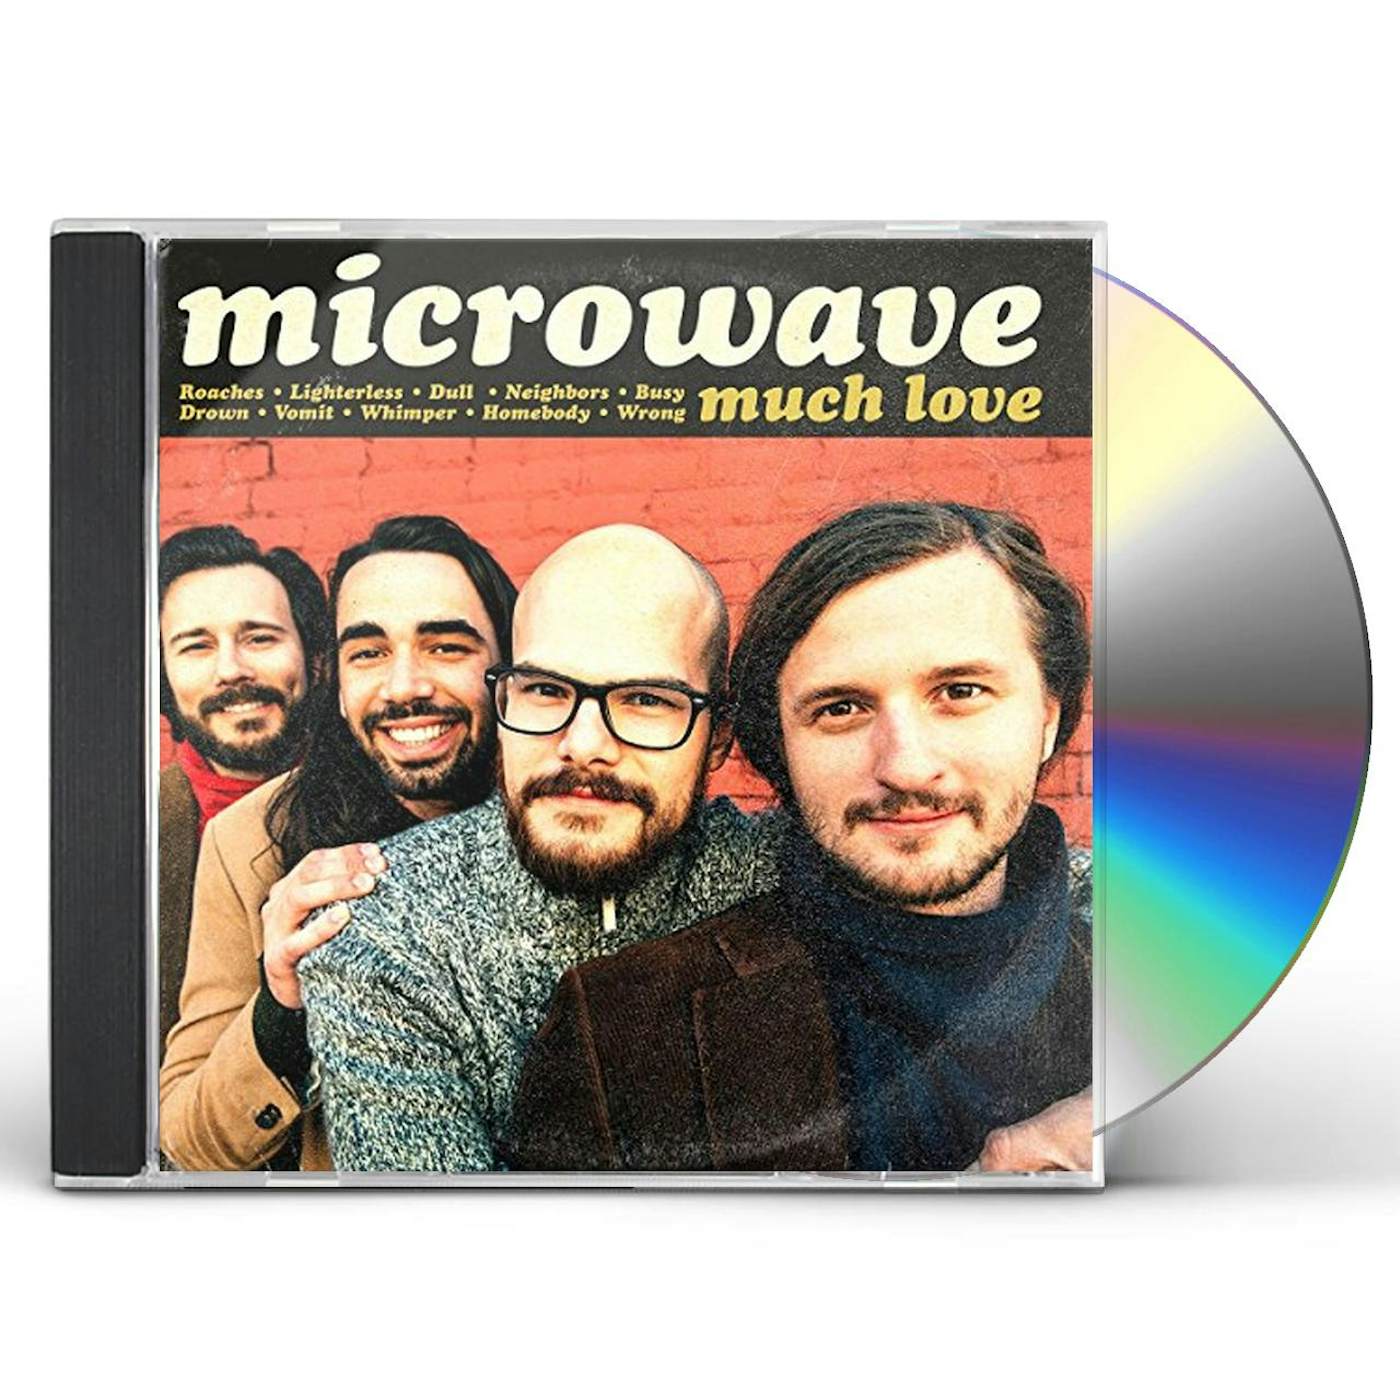 Microwave MUCH LOVE CD